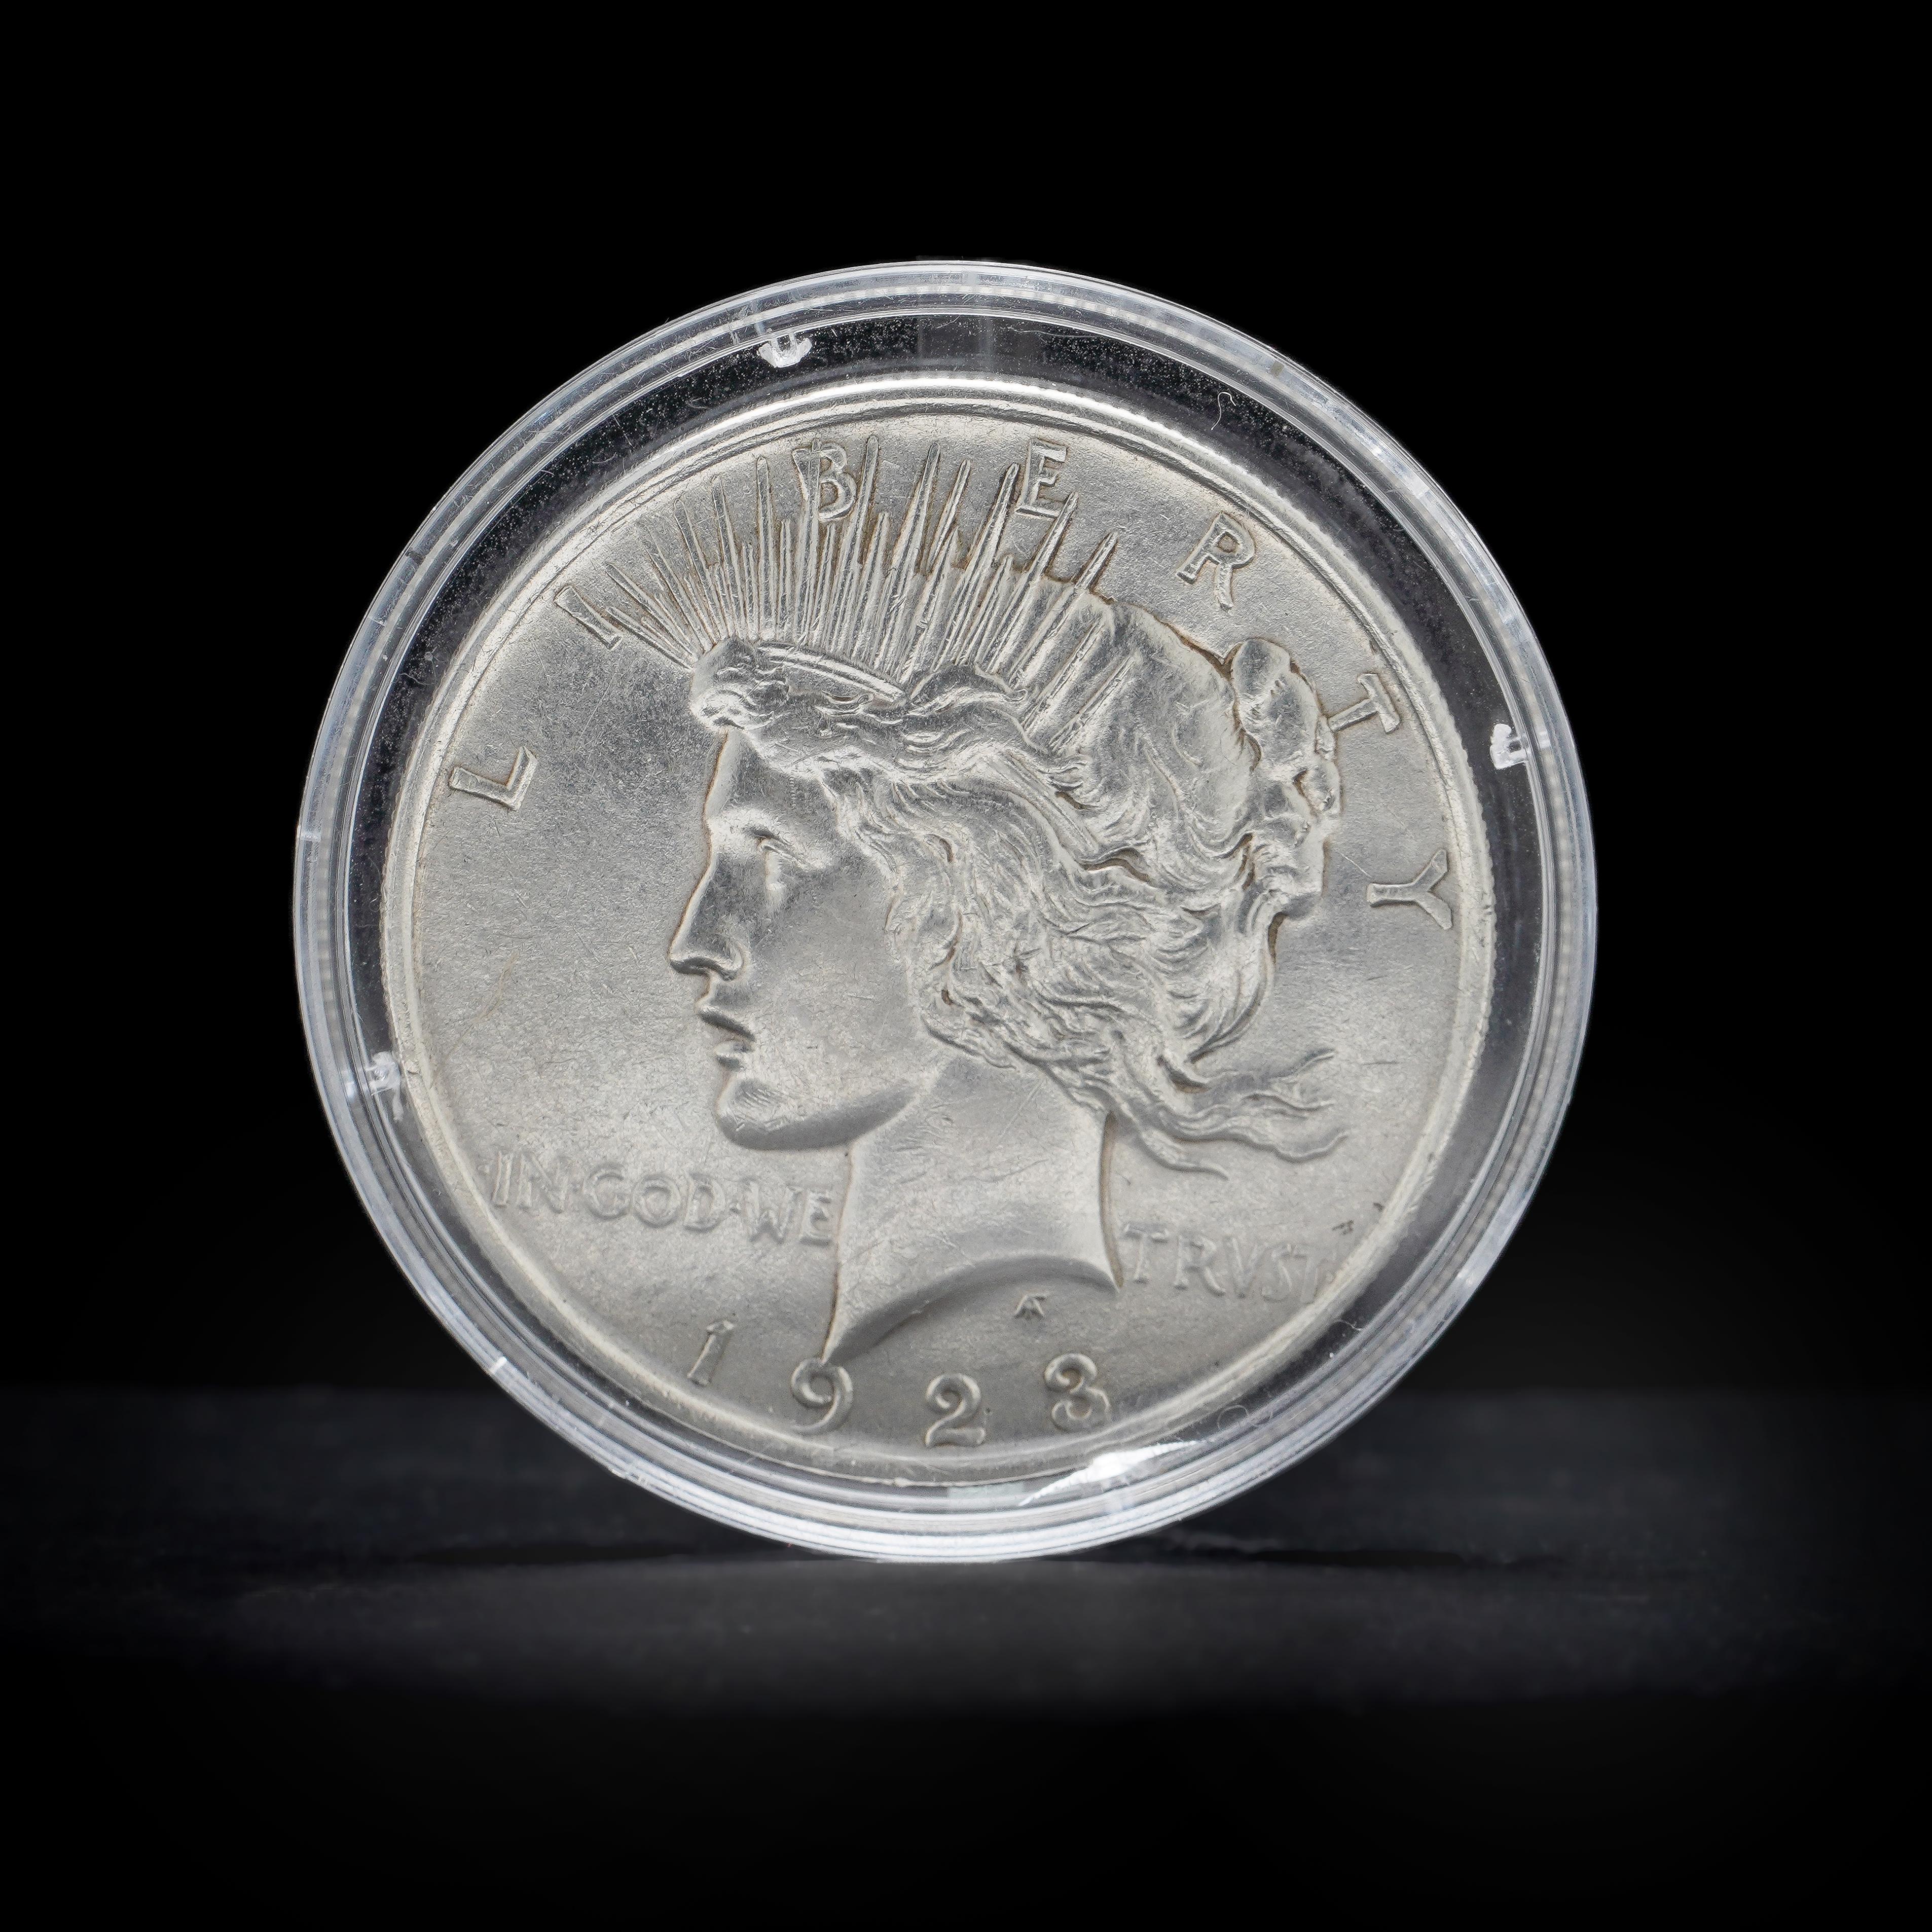 Vintage  1923 Peace Silver Dollar. 
Made in USA, 1923
Mint: Philadelphia
Comes with silver purity certificate. 

The obverse text on the Peace Dollar reads “Liberty; In God We Trvst (Trust); 1923.” The reverse text on the silver dollar reads “United